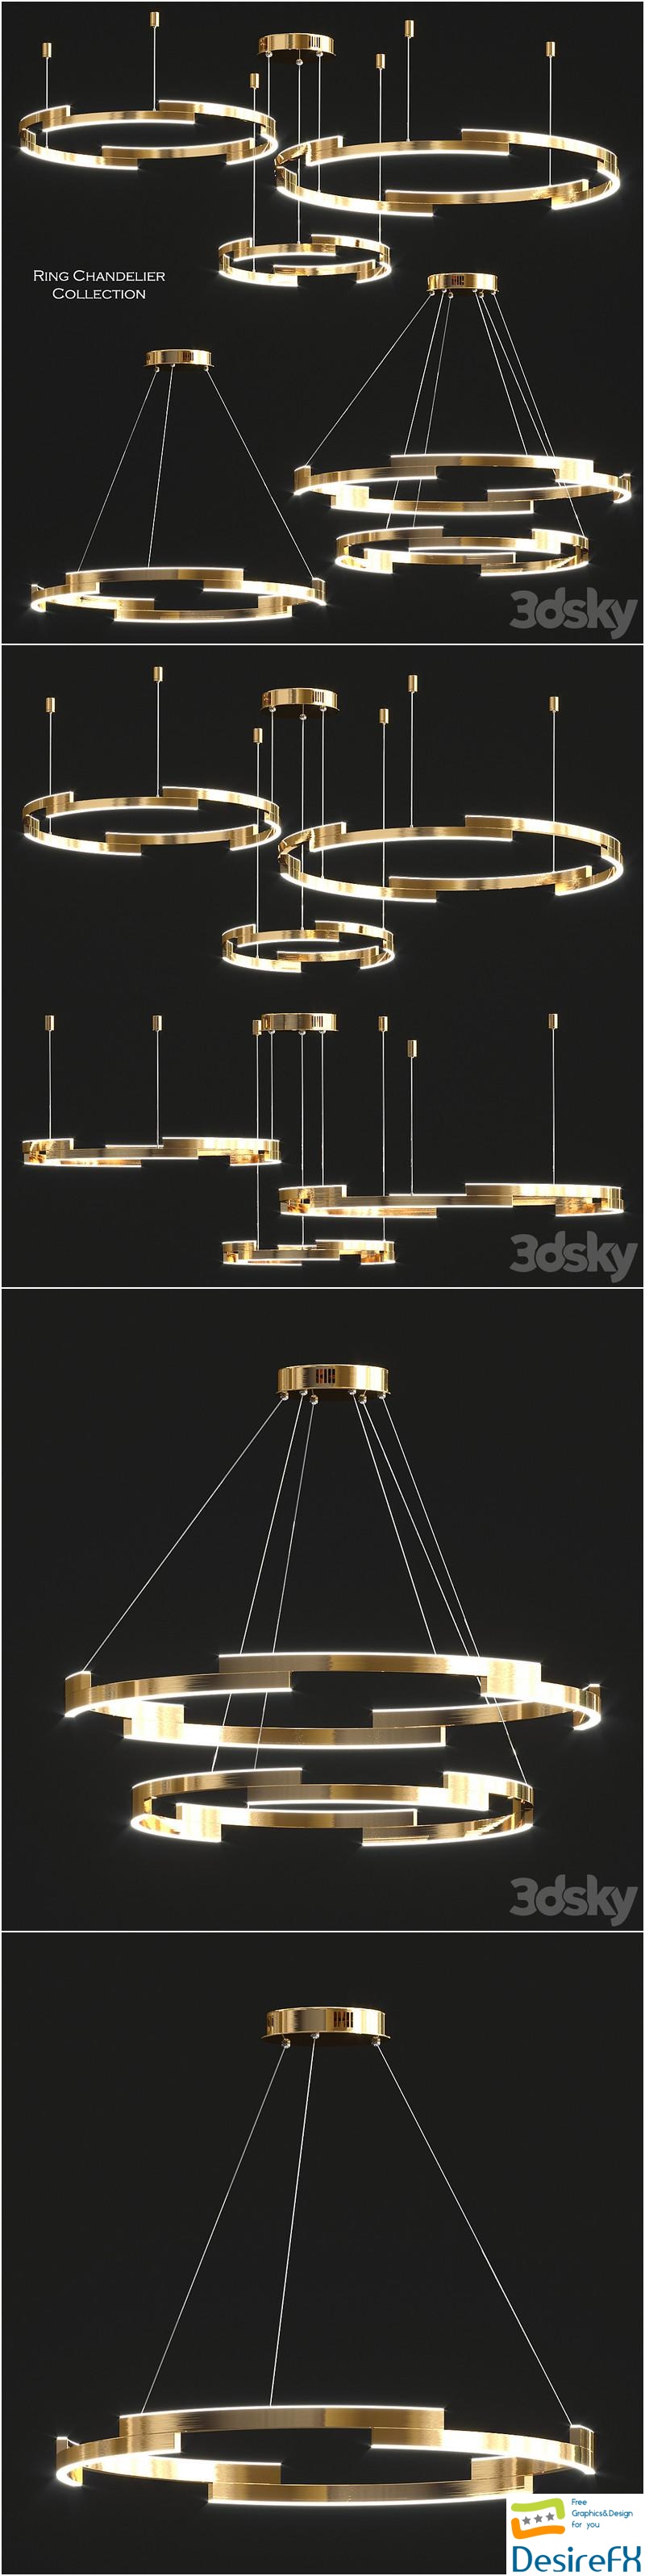 Ring chandelier collection 3D Model